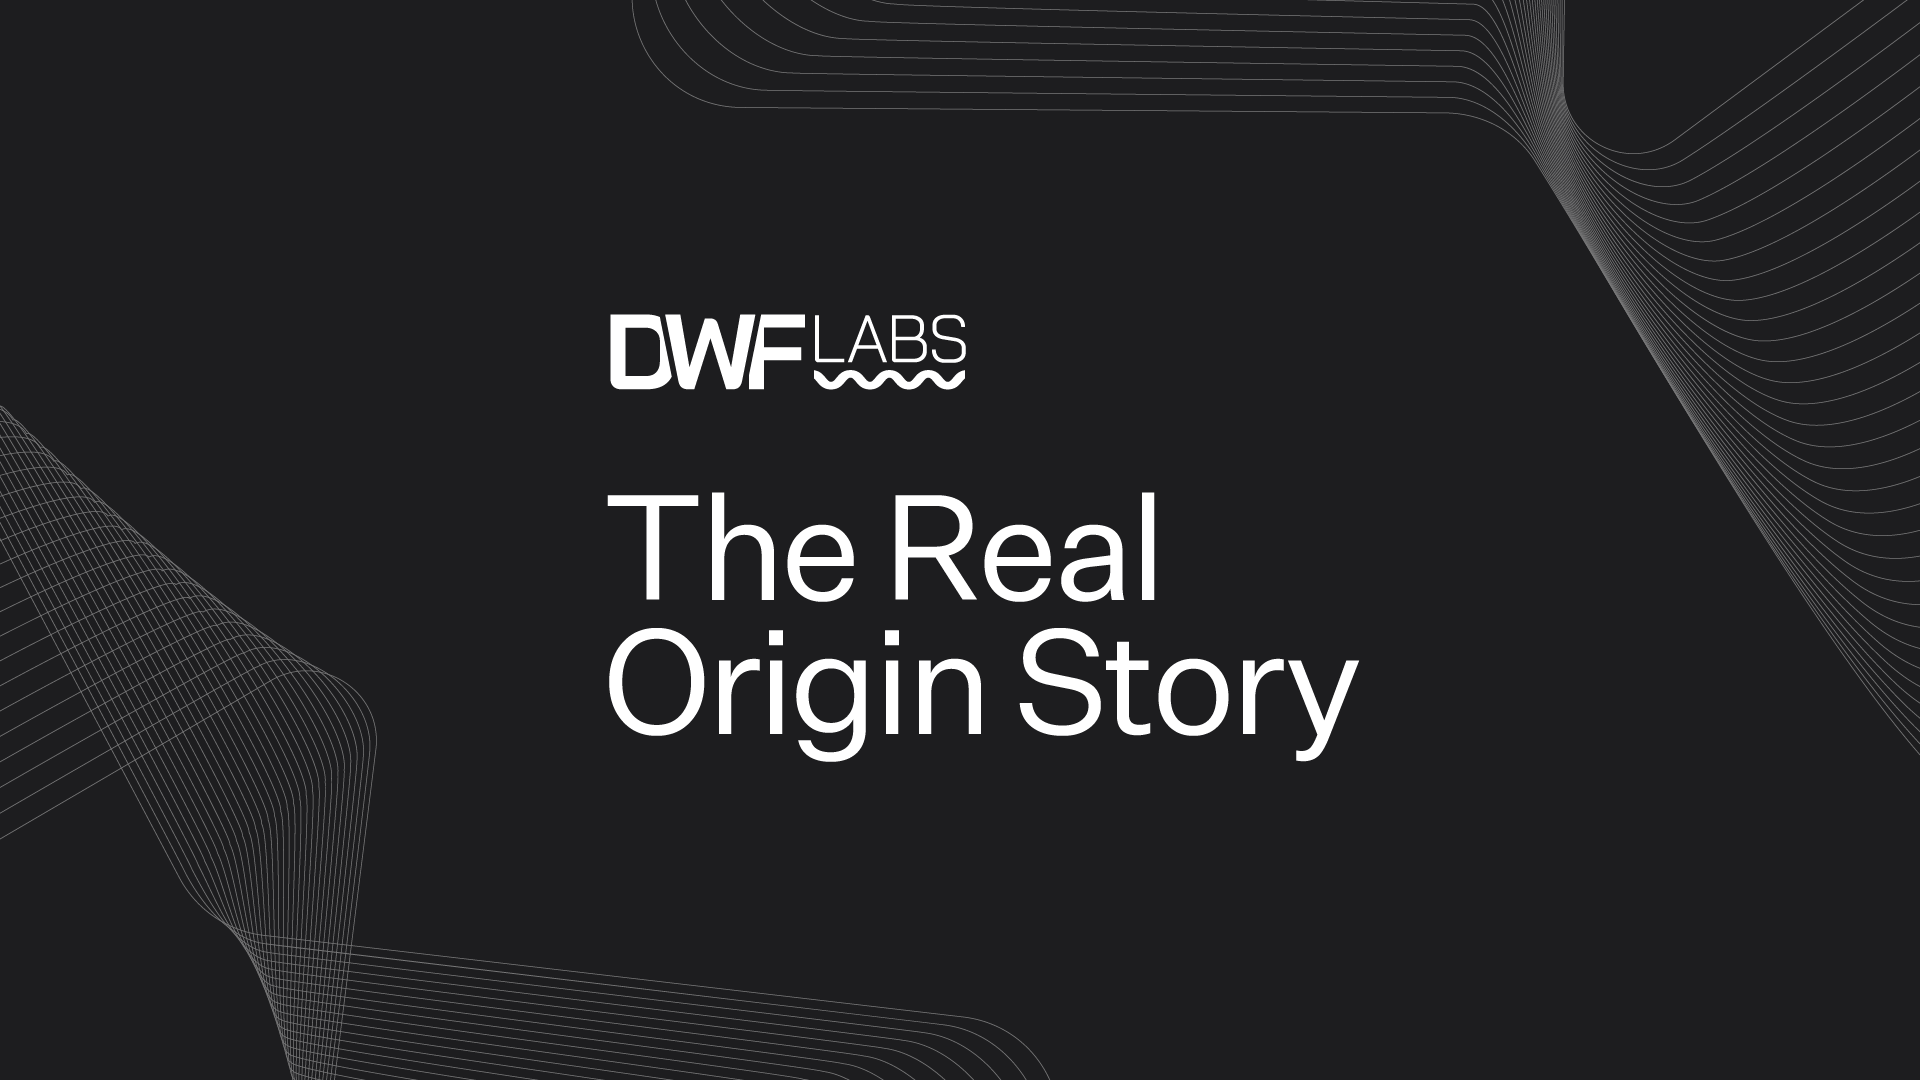 The real DWF Labs origin story